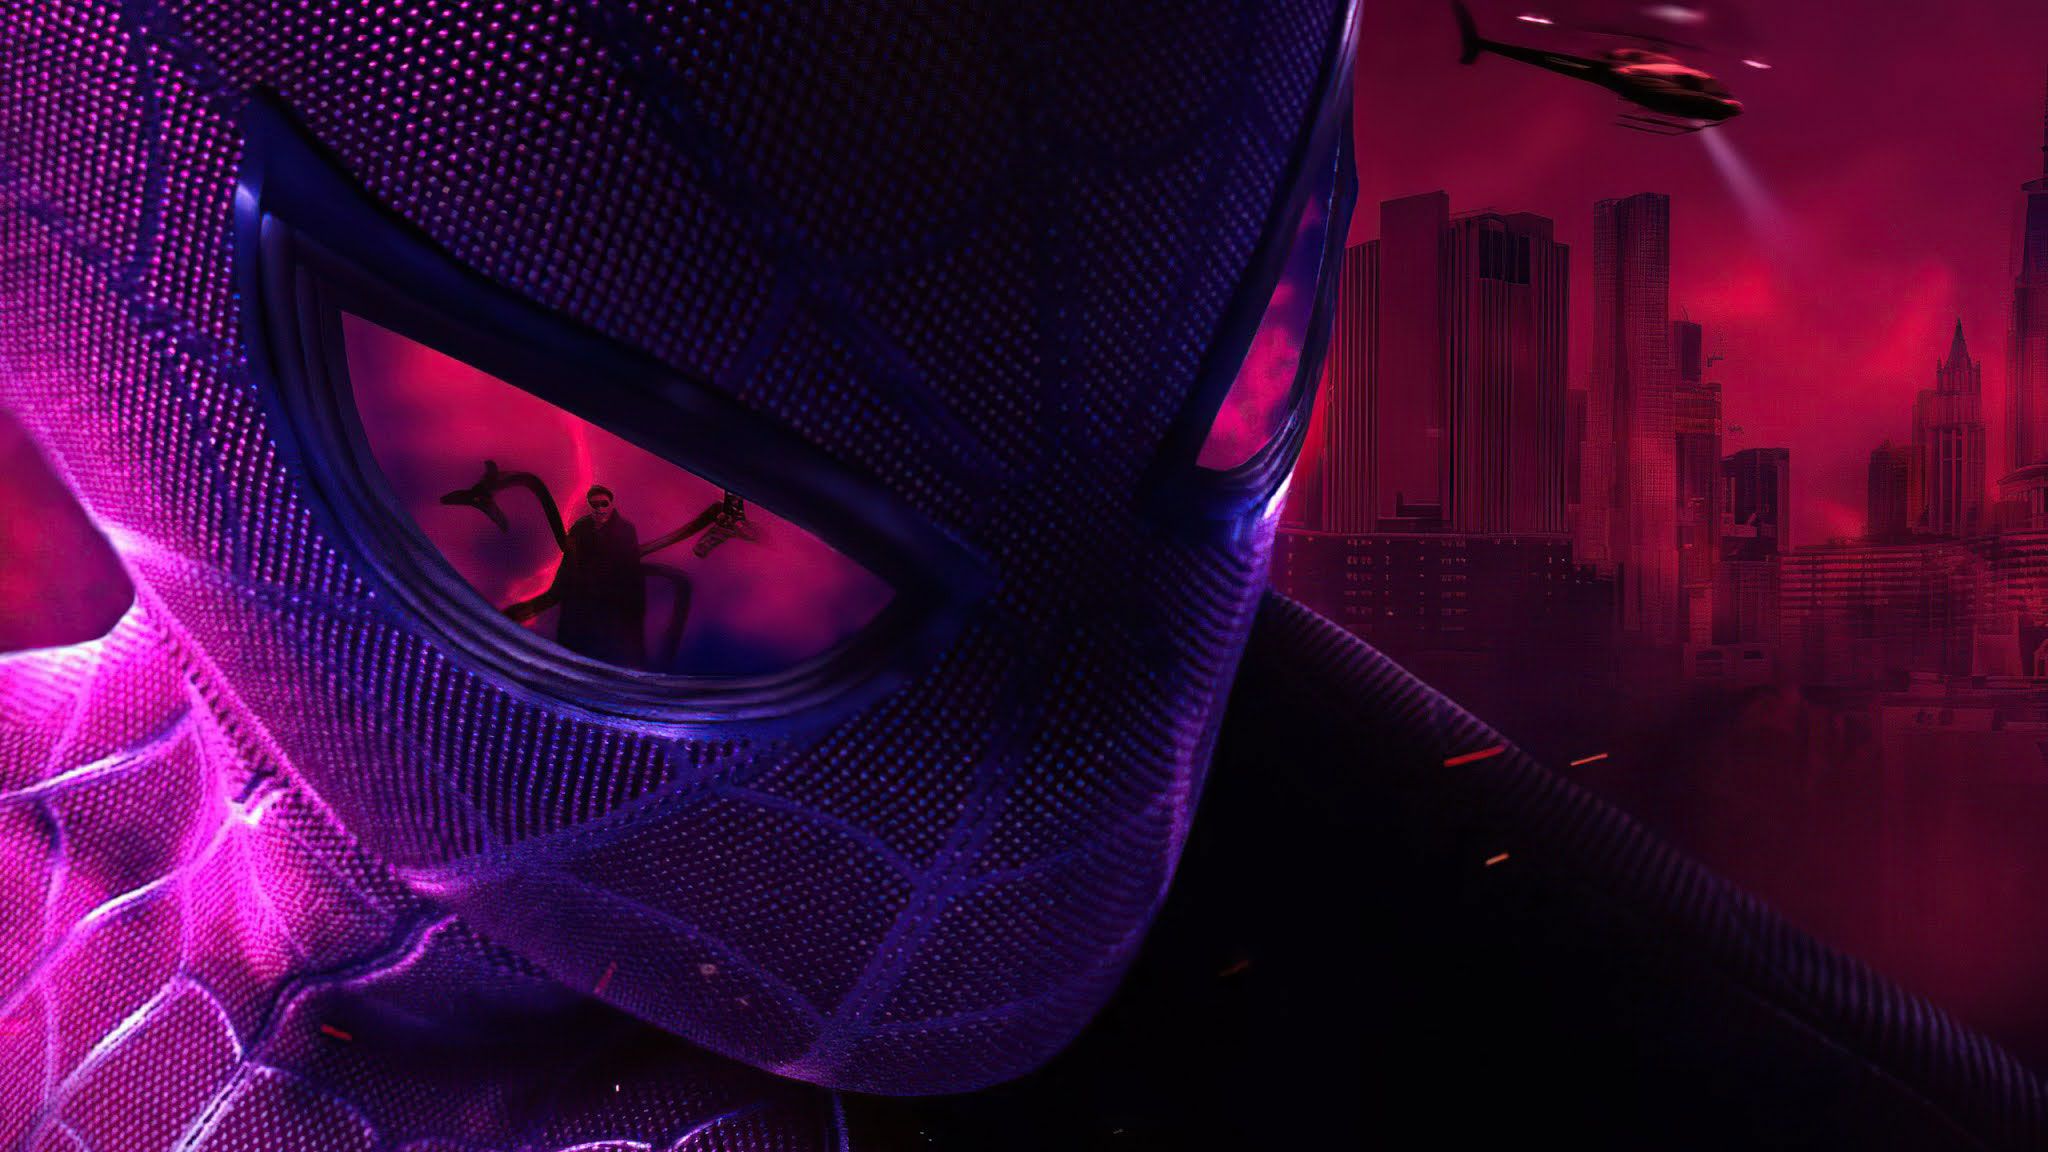 Spider man into the Spiderverse wallpaper - 